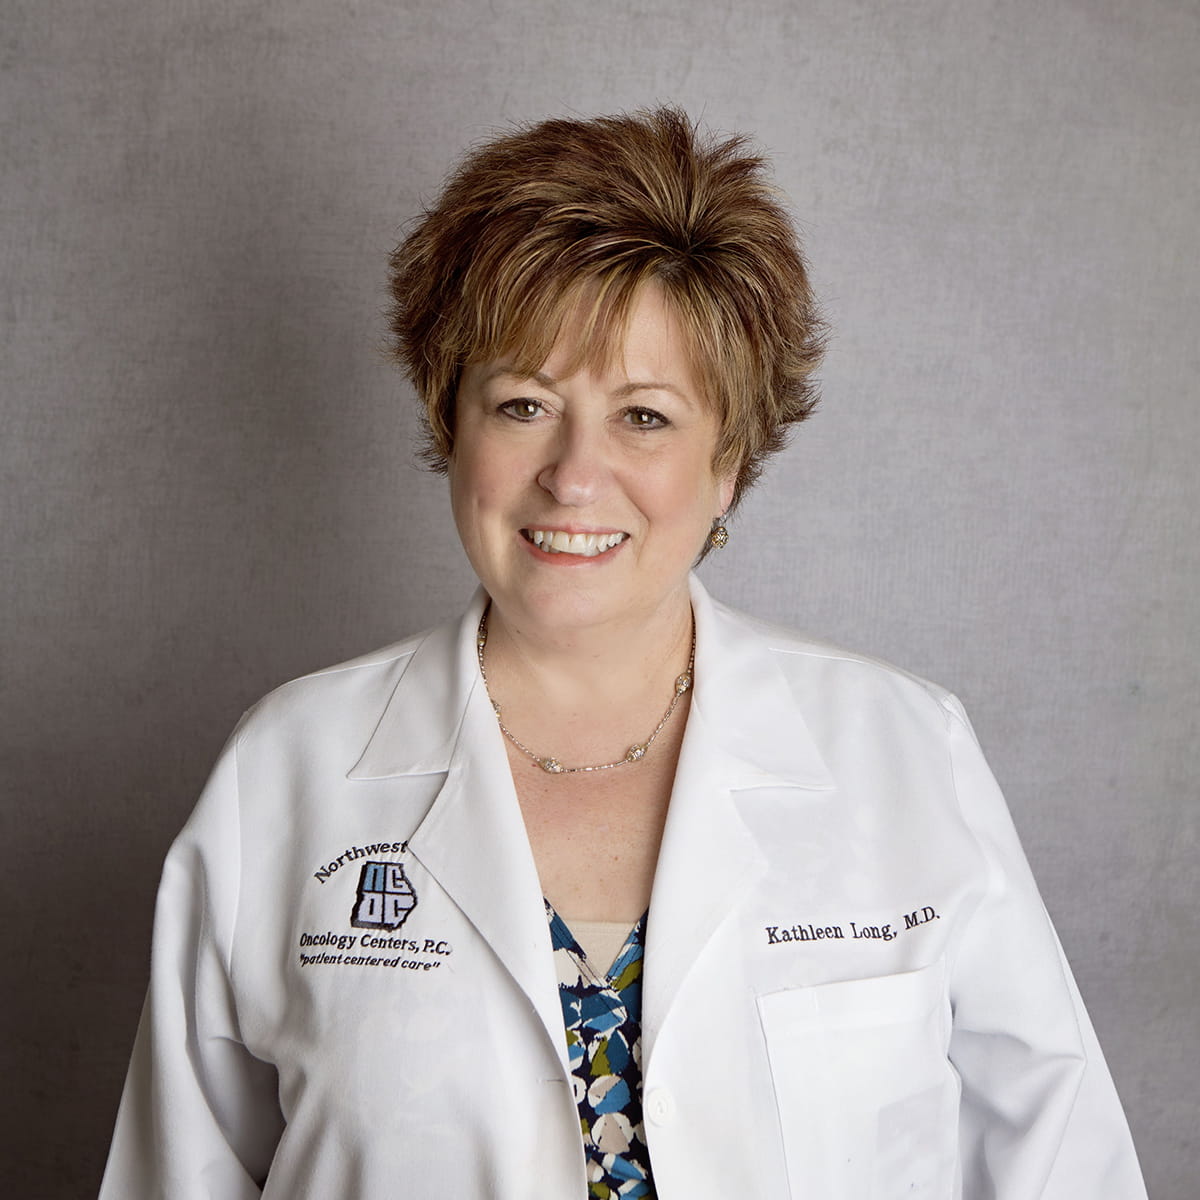 A friendly photo of Kathy Long, MD